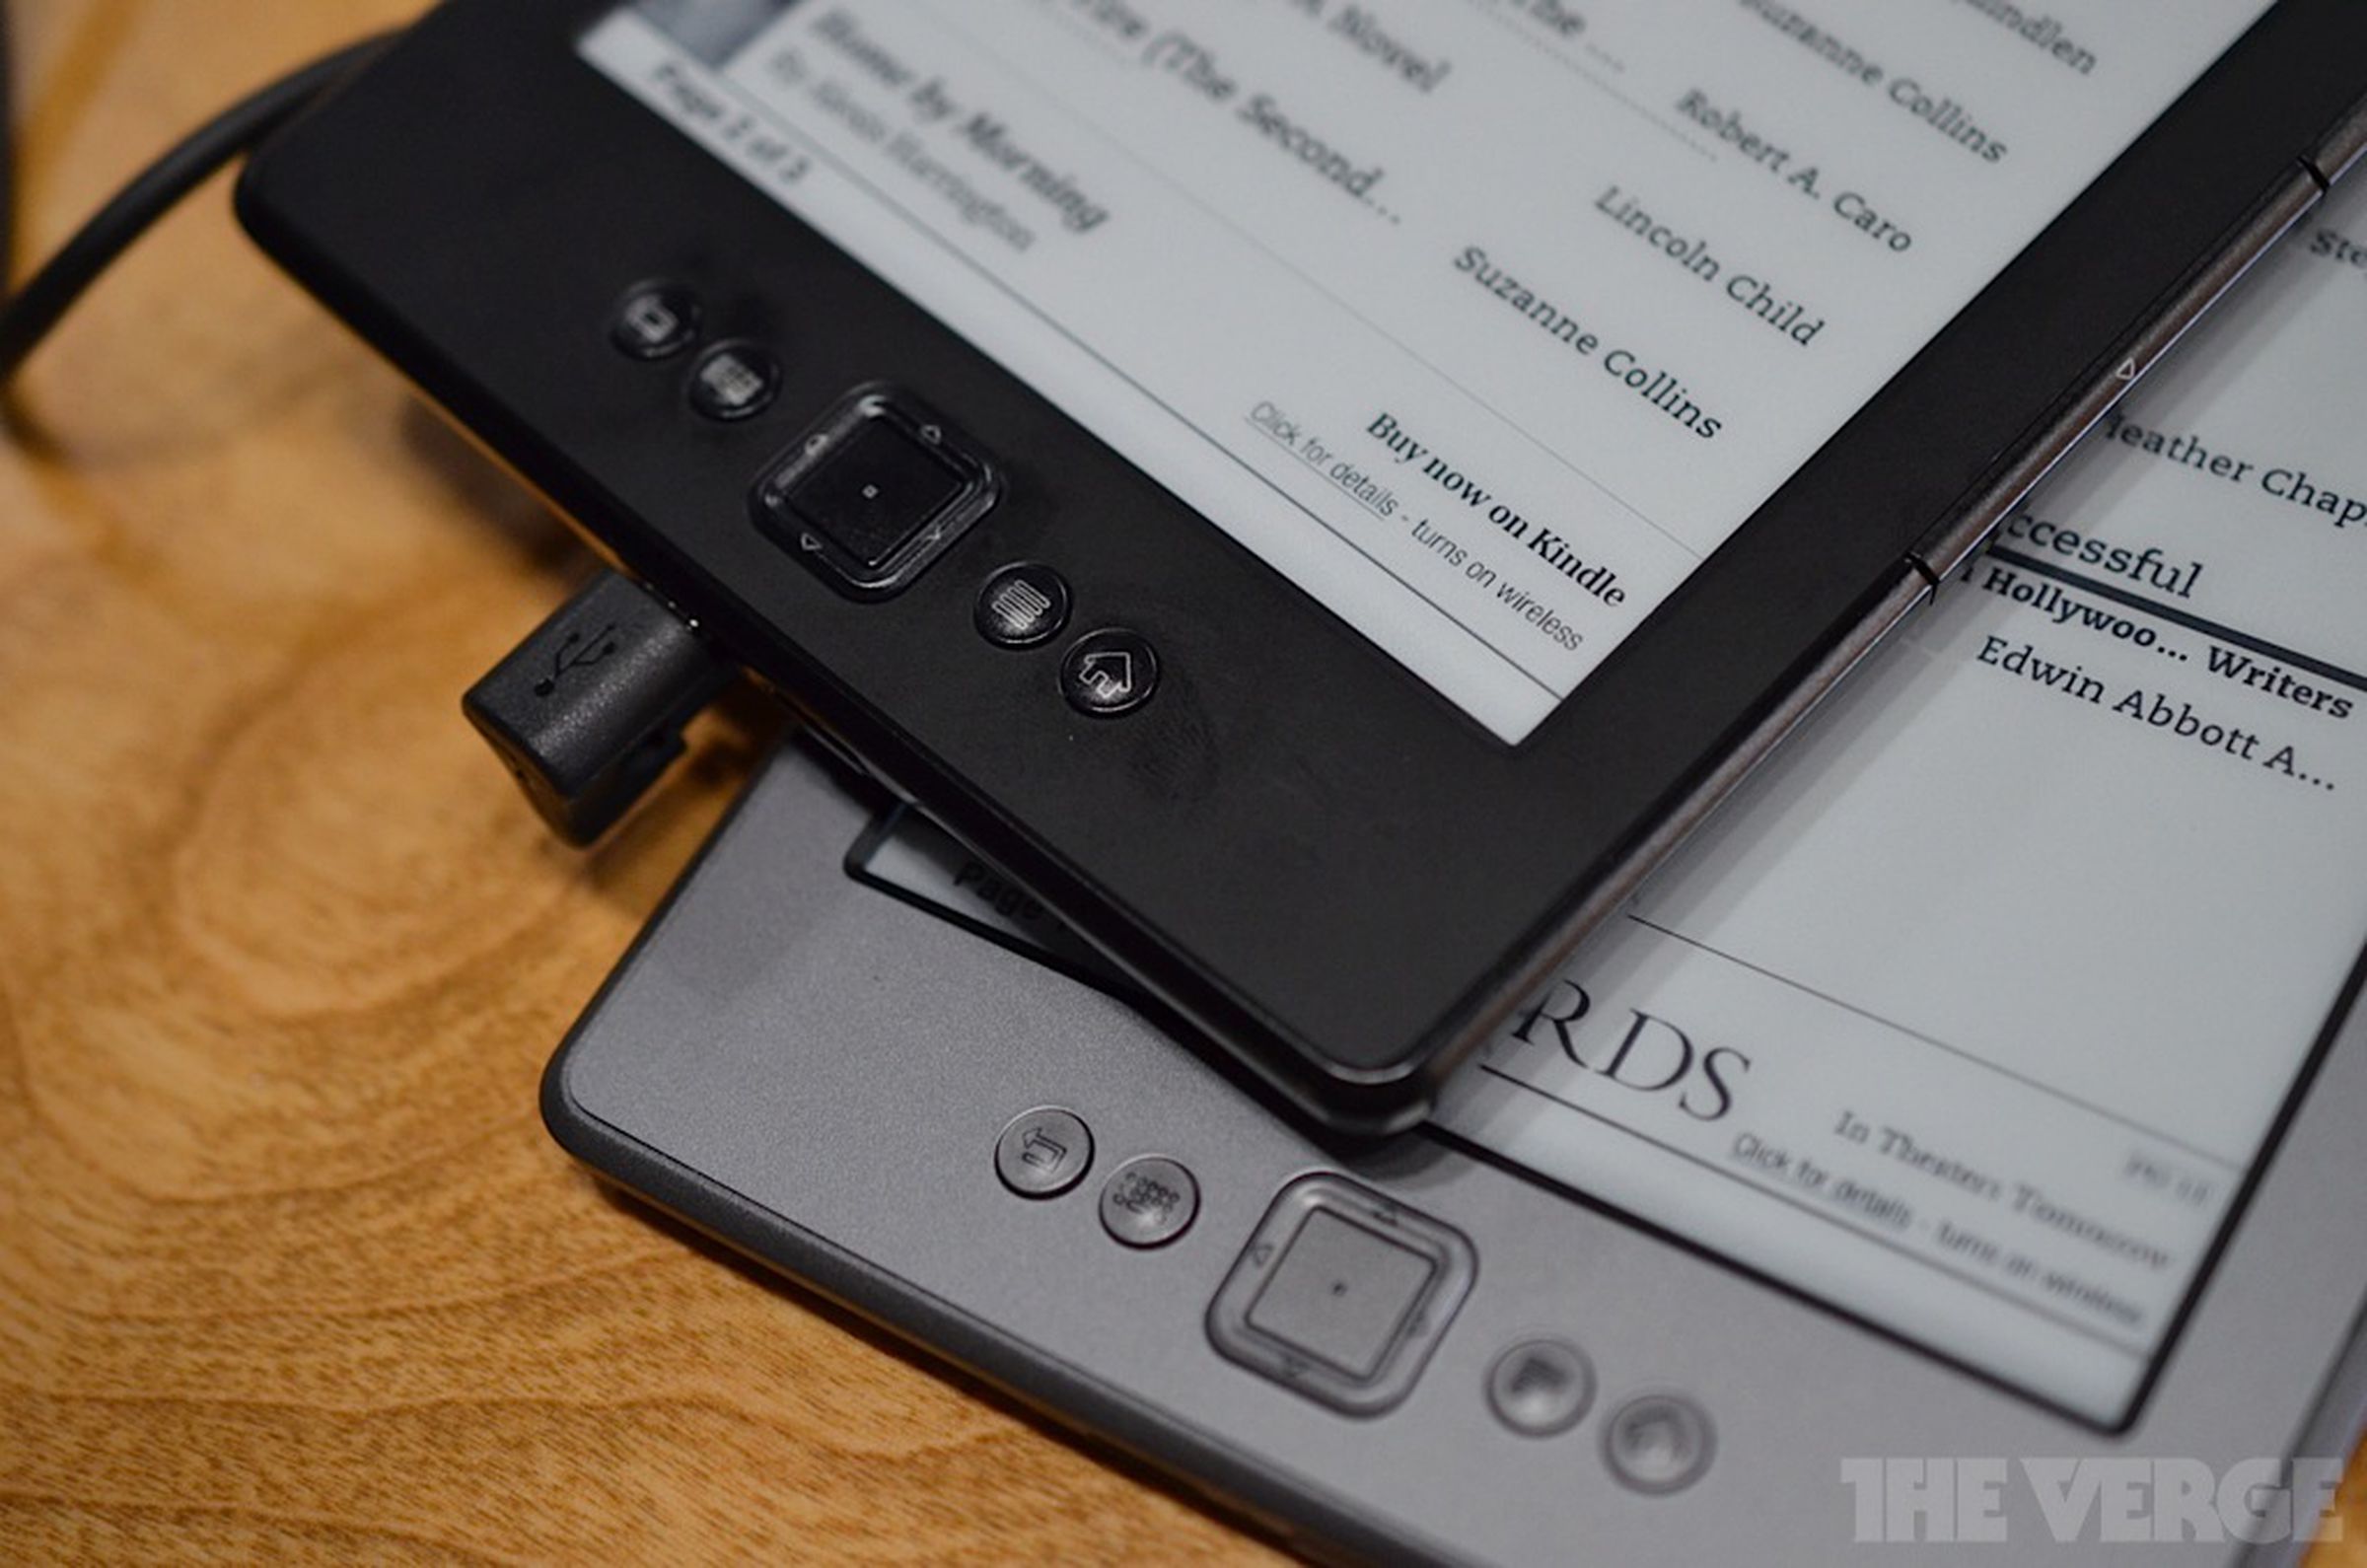 Amazon's $69 Kindle hands-on pictures